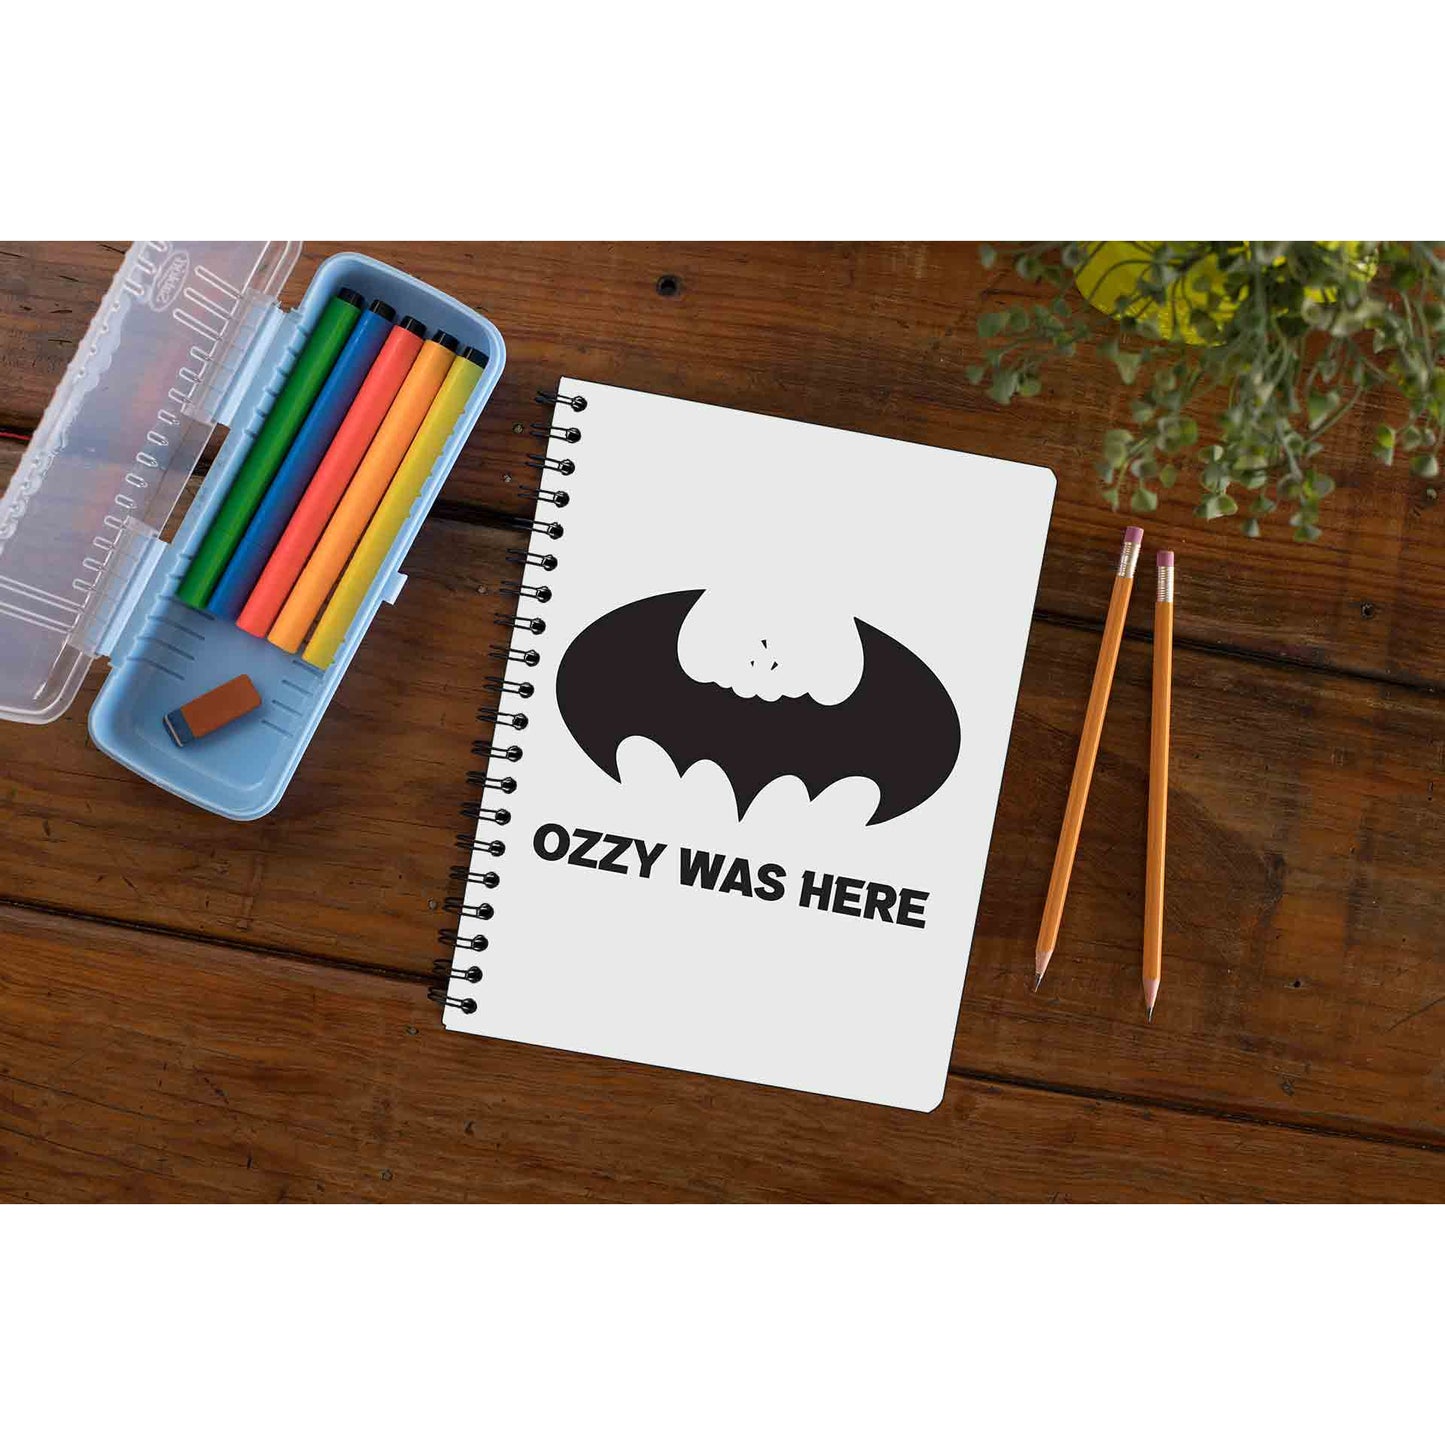 black sabbath ozzy was here notebook notepad diary buy online india the banyan tee tbt unruled